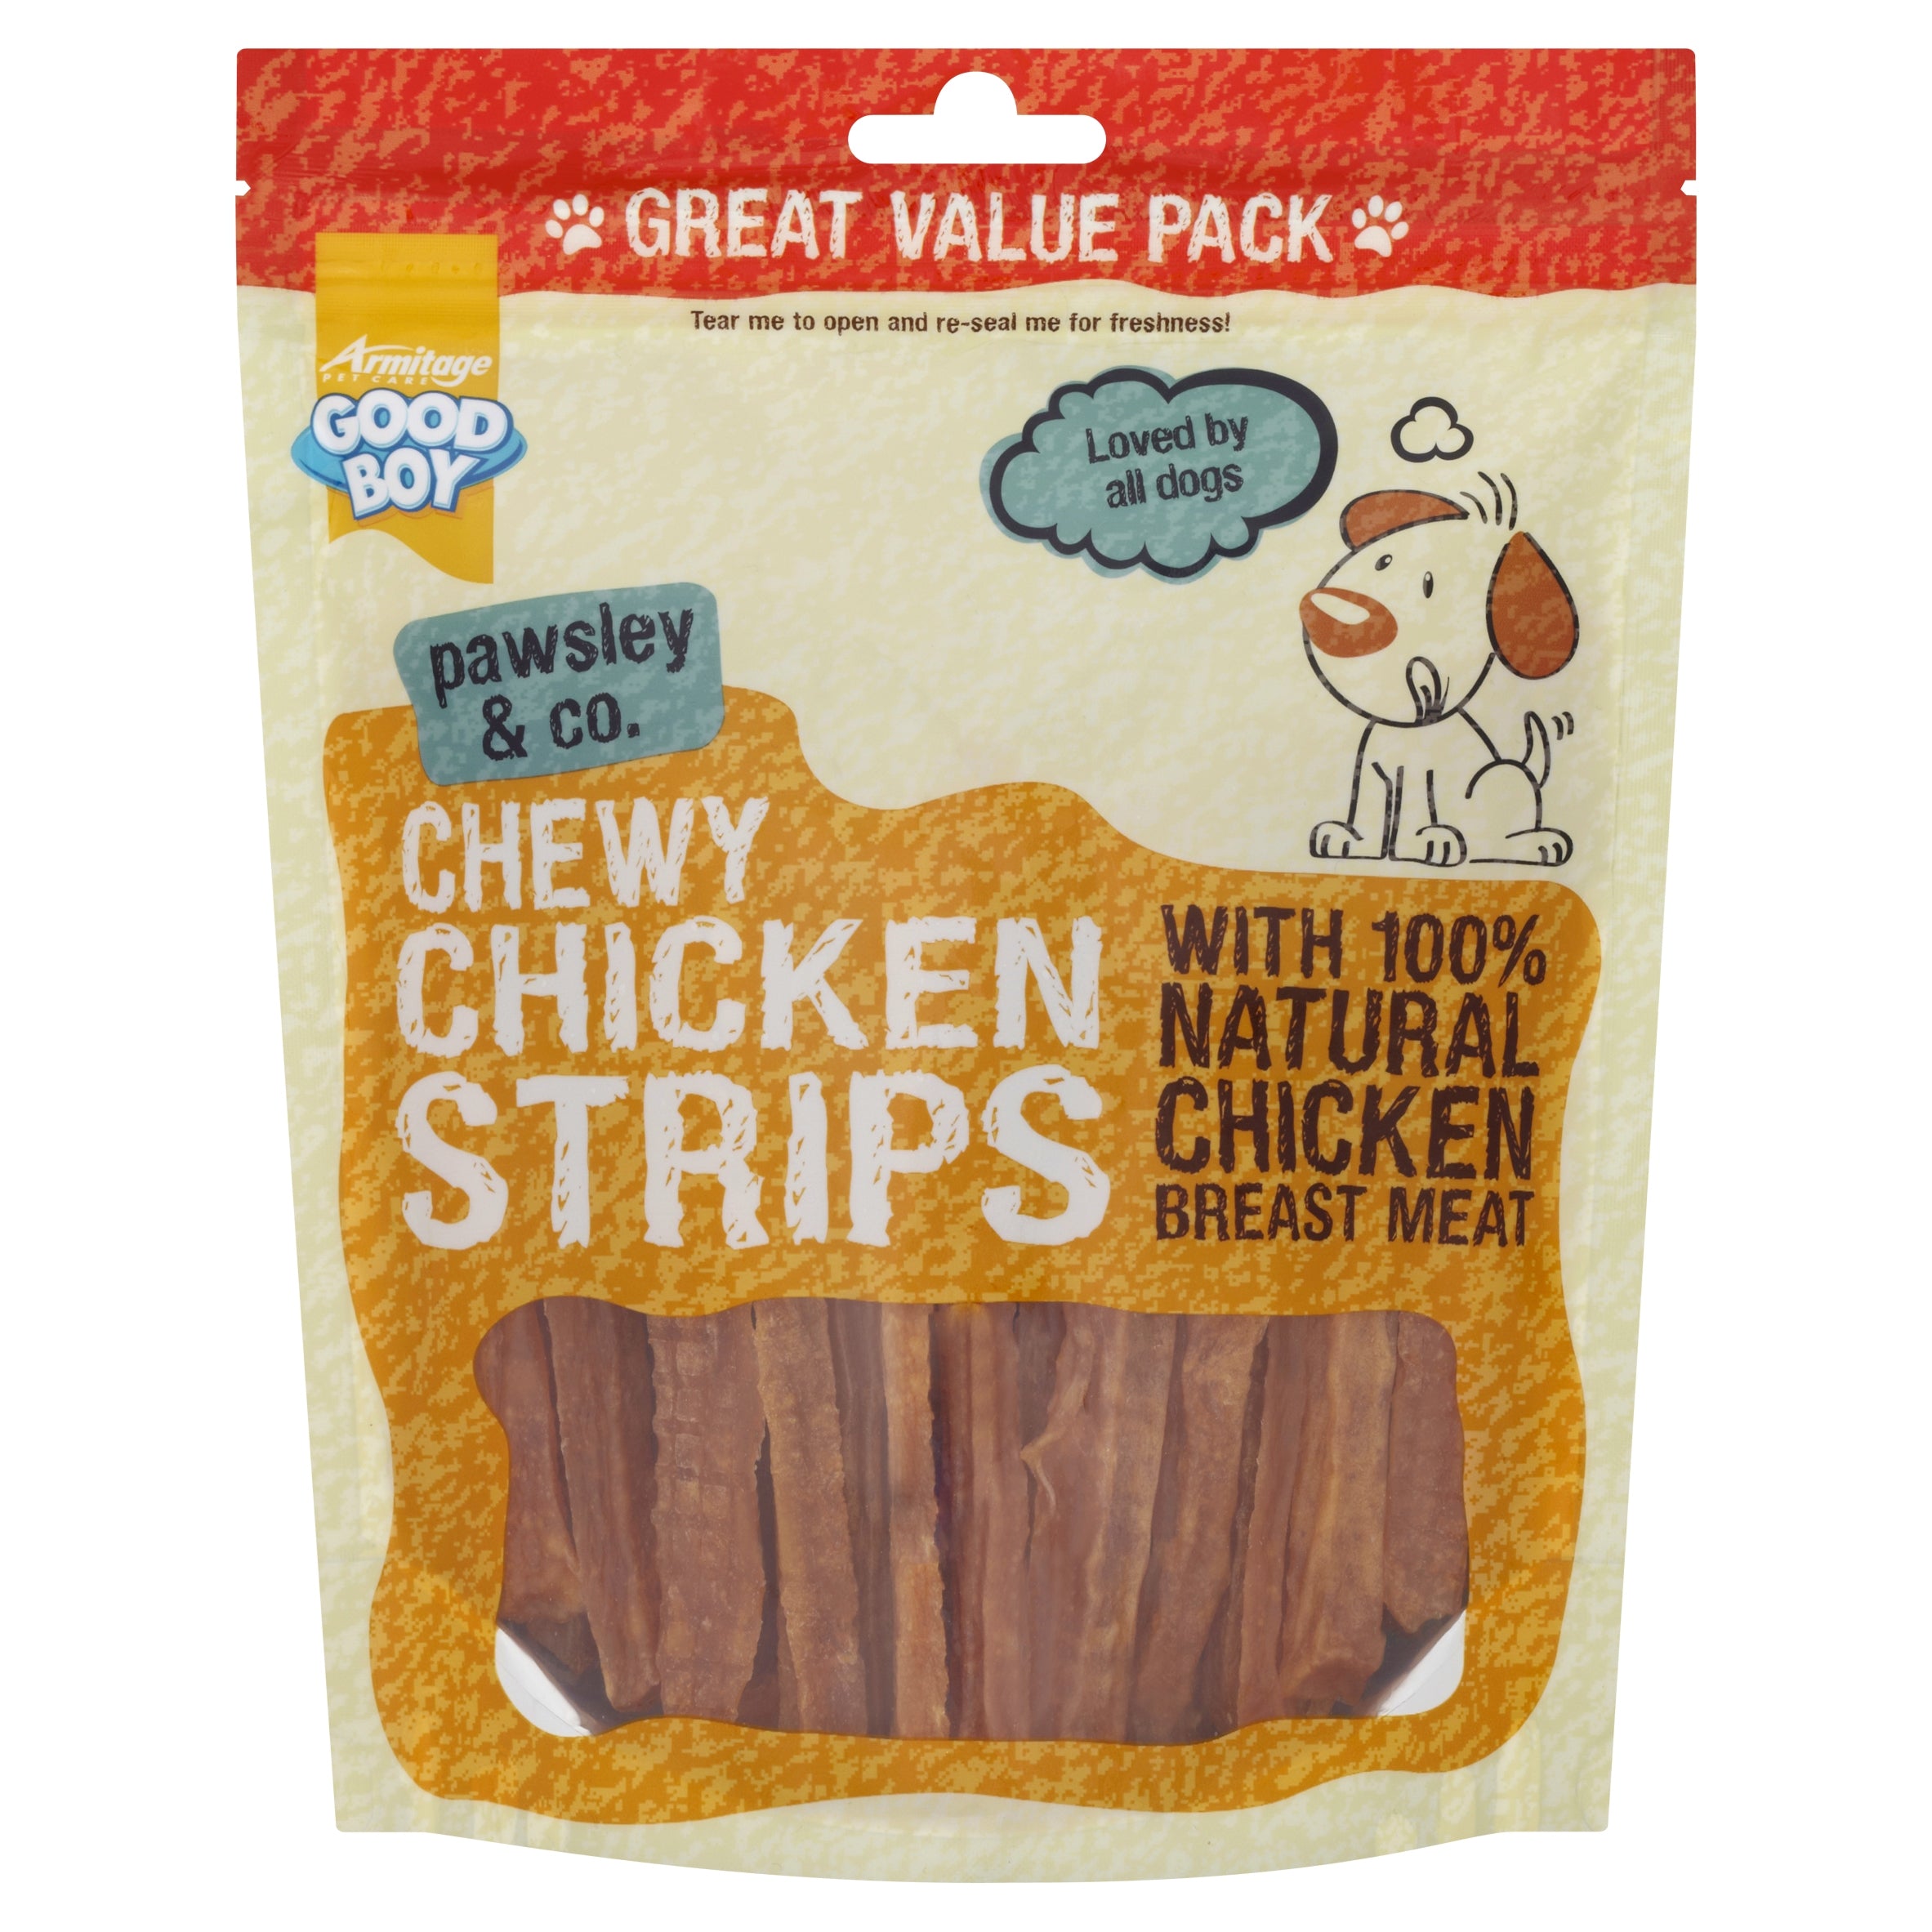 GOOD BOY Chewy Chicken Strips Value Pack (350gr)